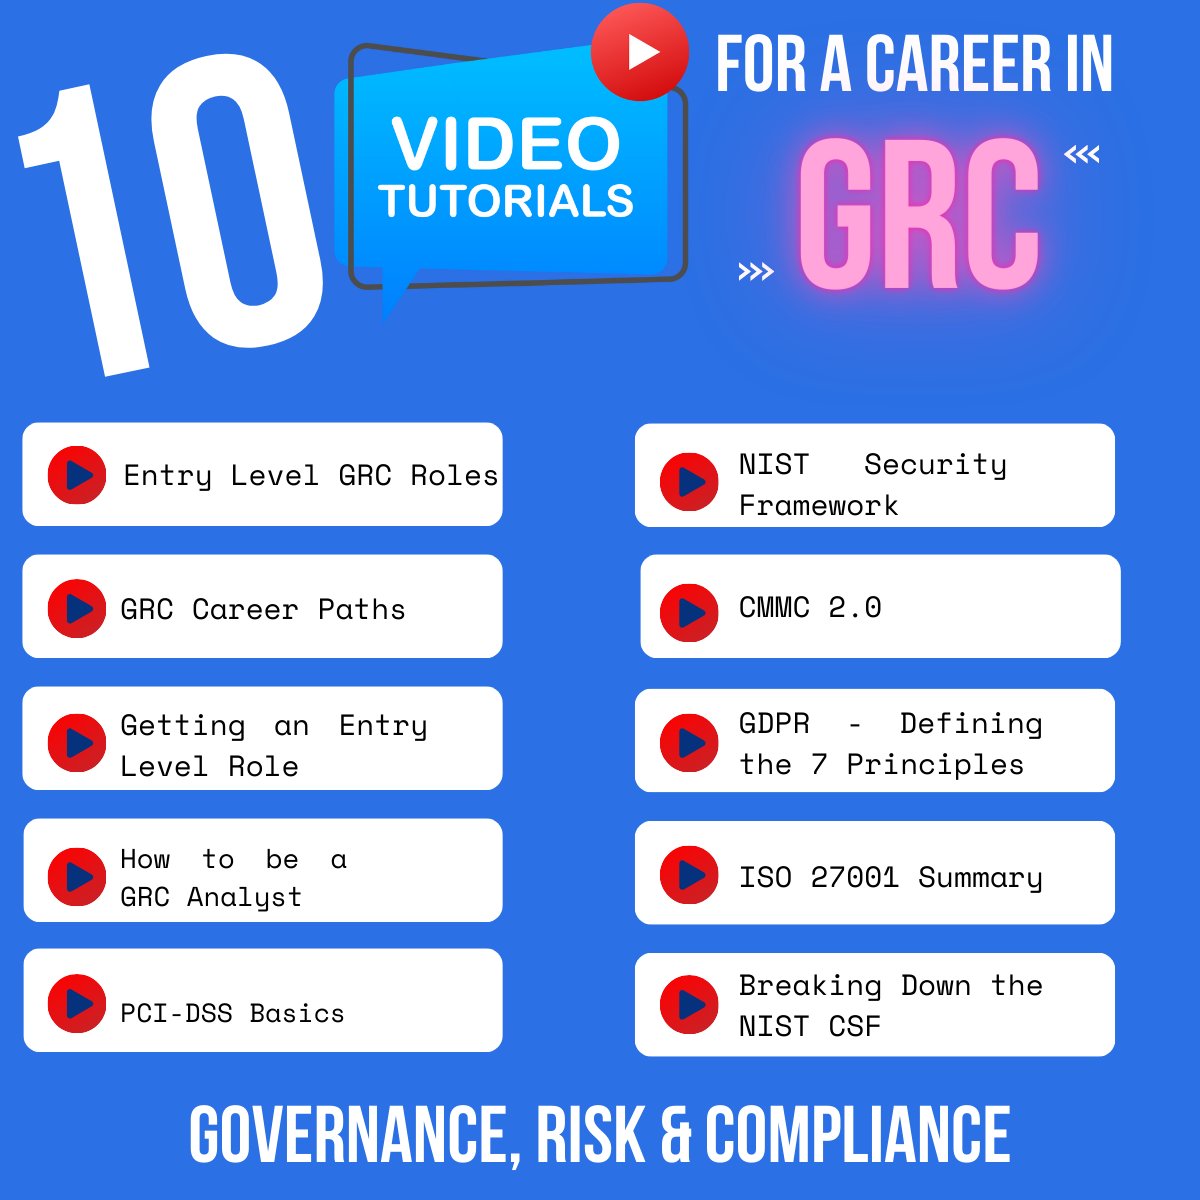 FREE GRC TRAINING VIDEOS - Careers in Governance, Risk and Compliance.

I have curated a list of free training videos that will give you a huge head start in the field of GRC. If you are looking for a great career in Cyber Security, but you aren't super technical, this could be…